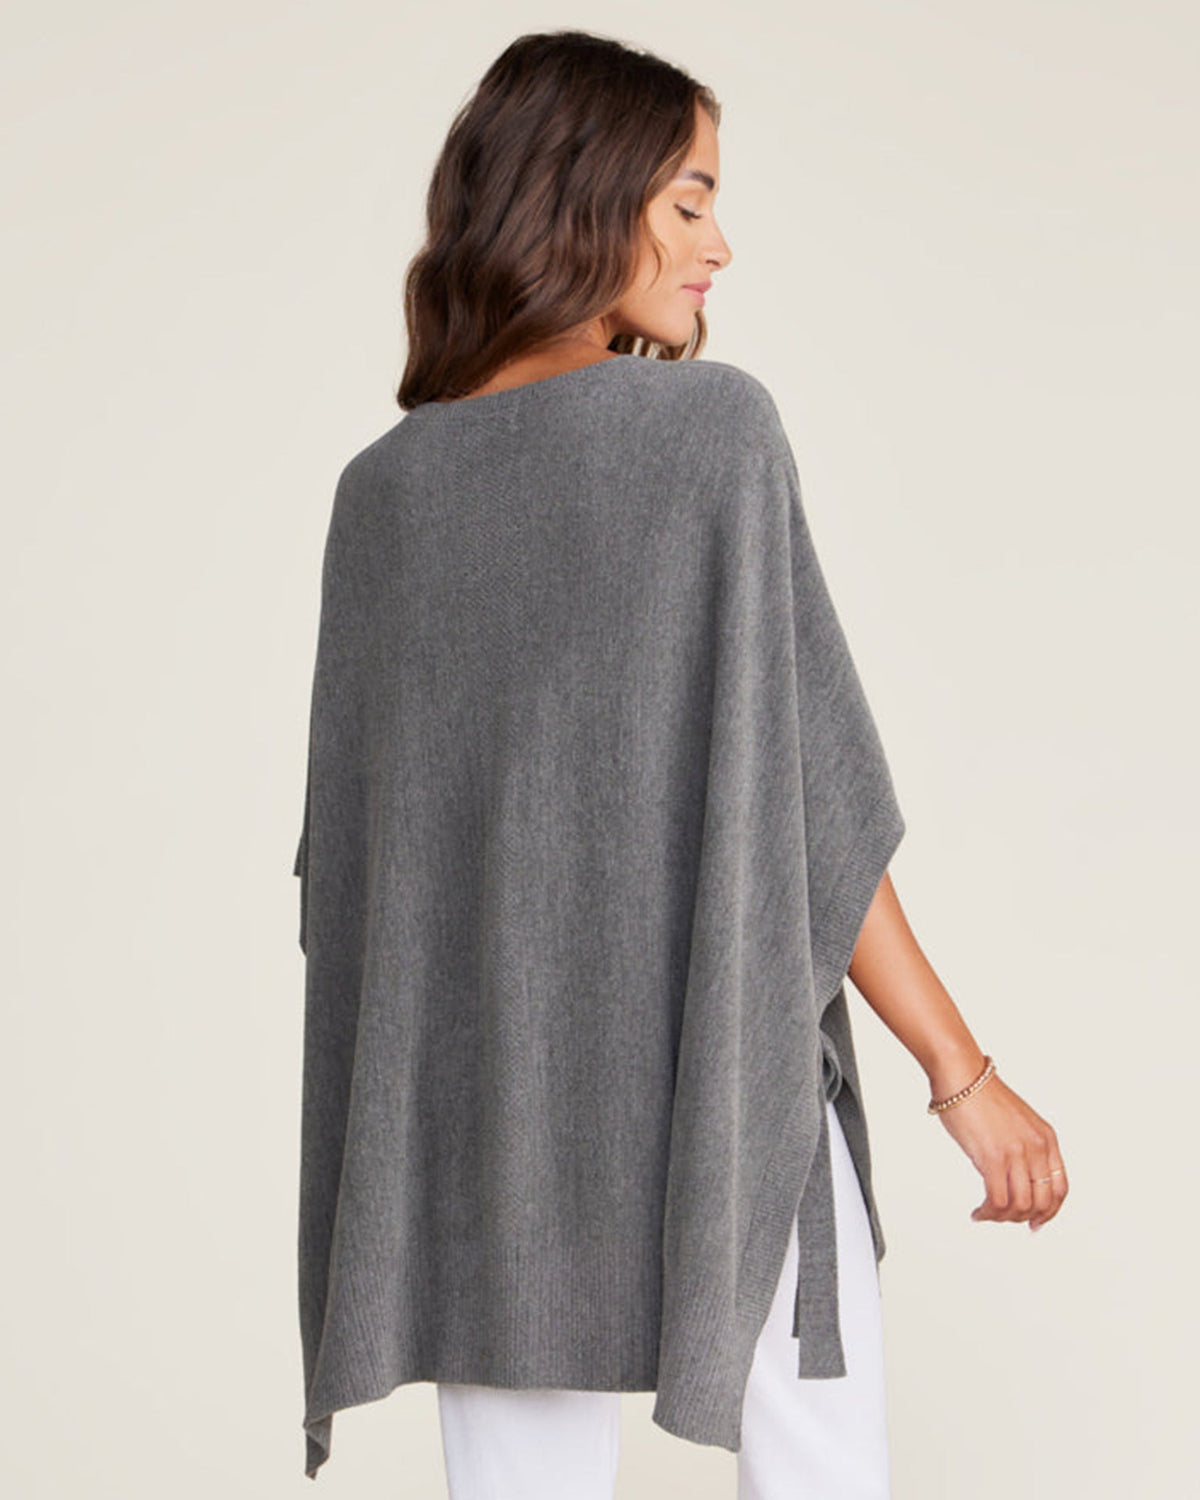 Barefoot Dreams Clothing CCUL Hi Low Poncho w/ Side T in Olive Branch